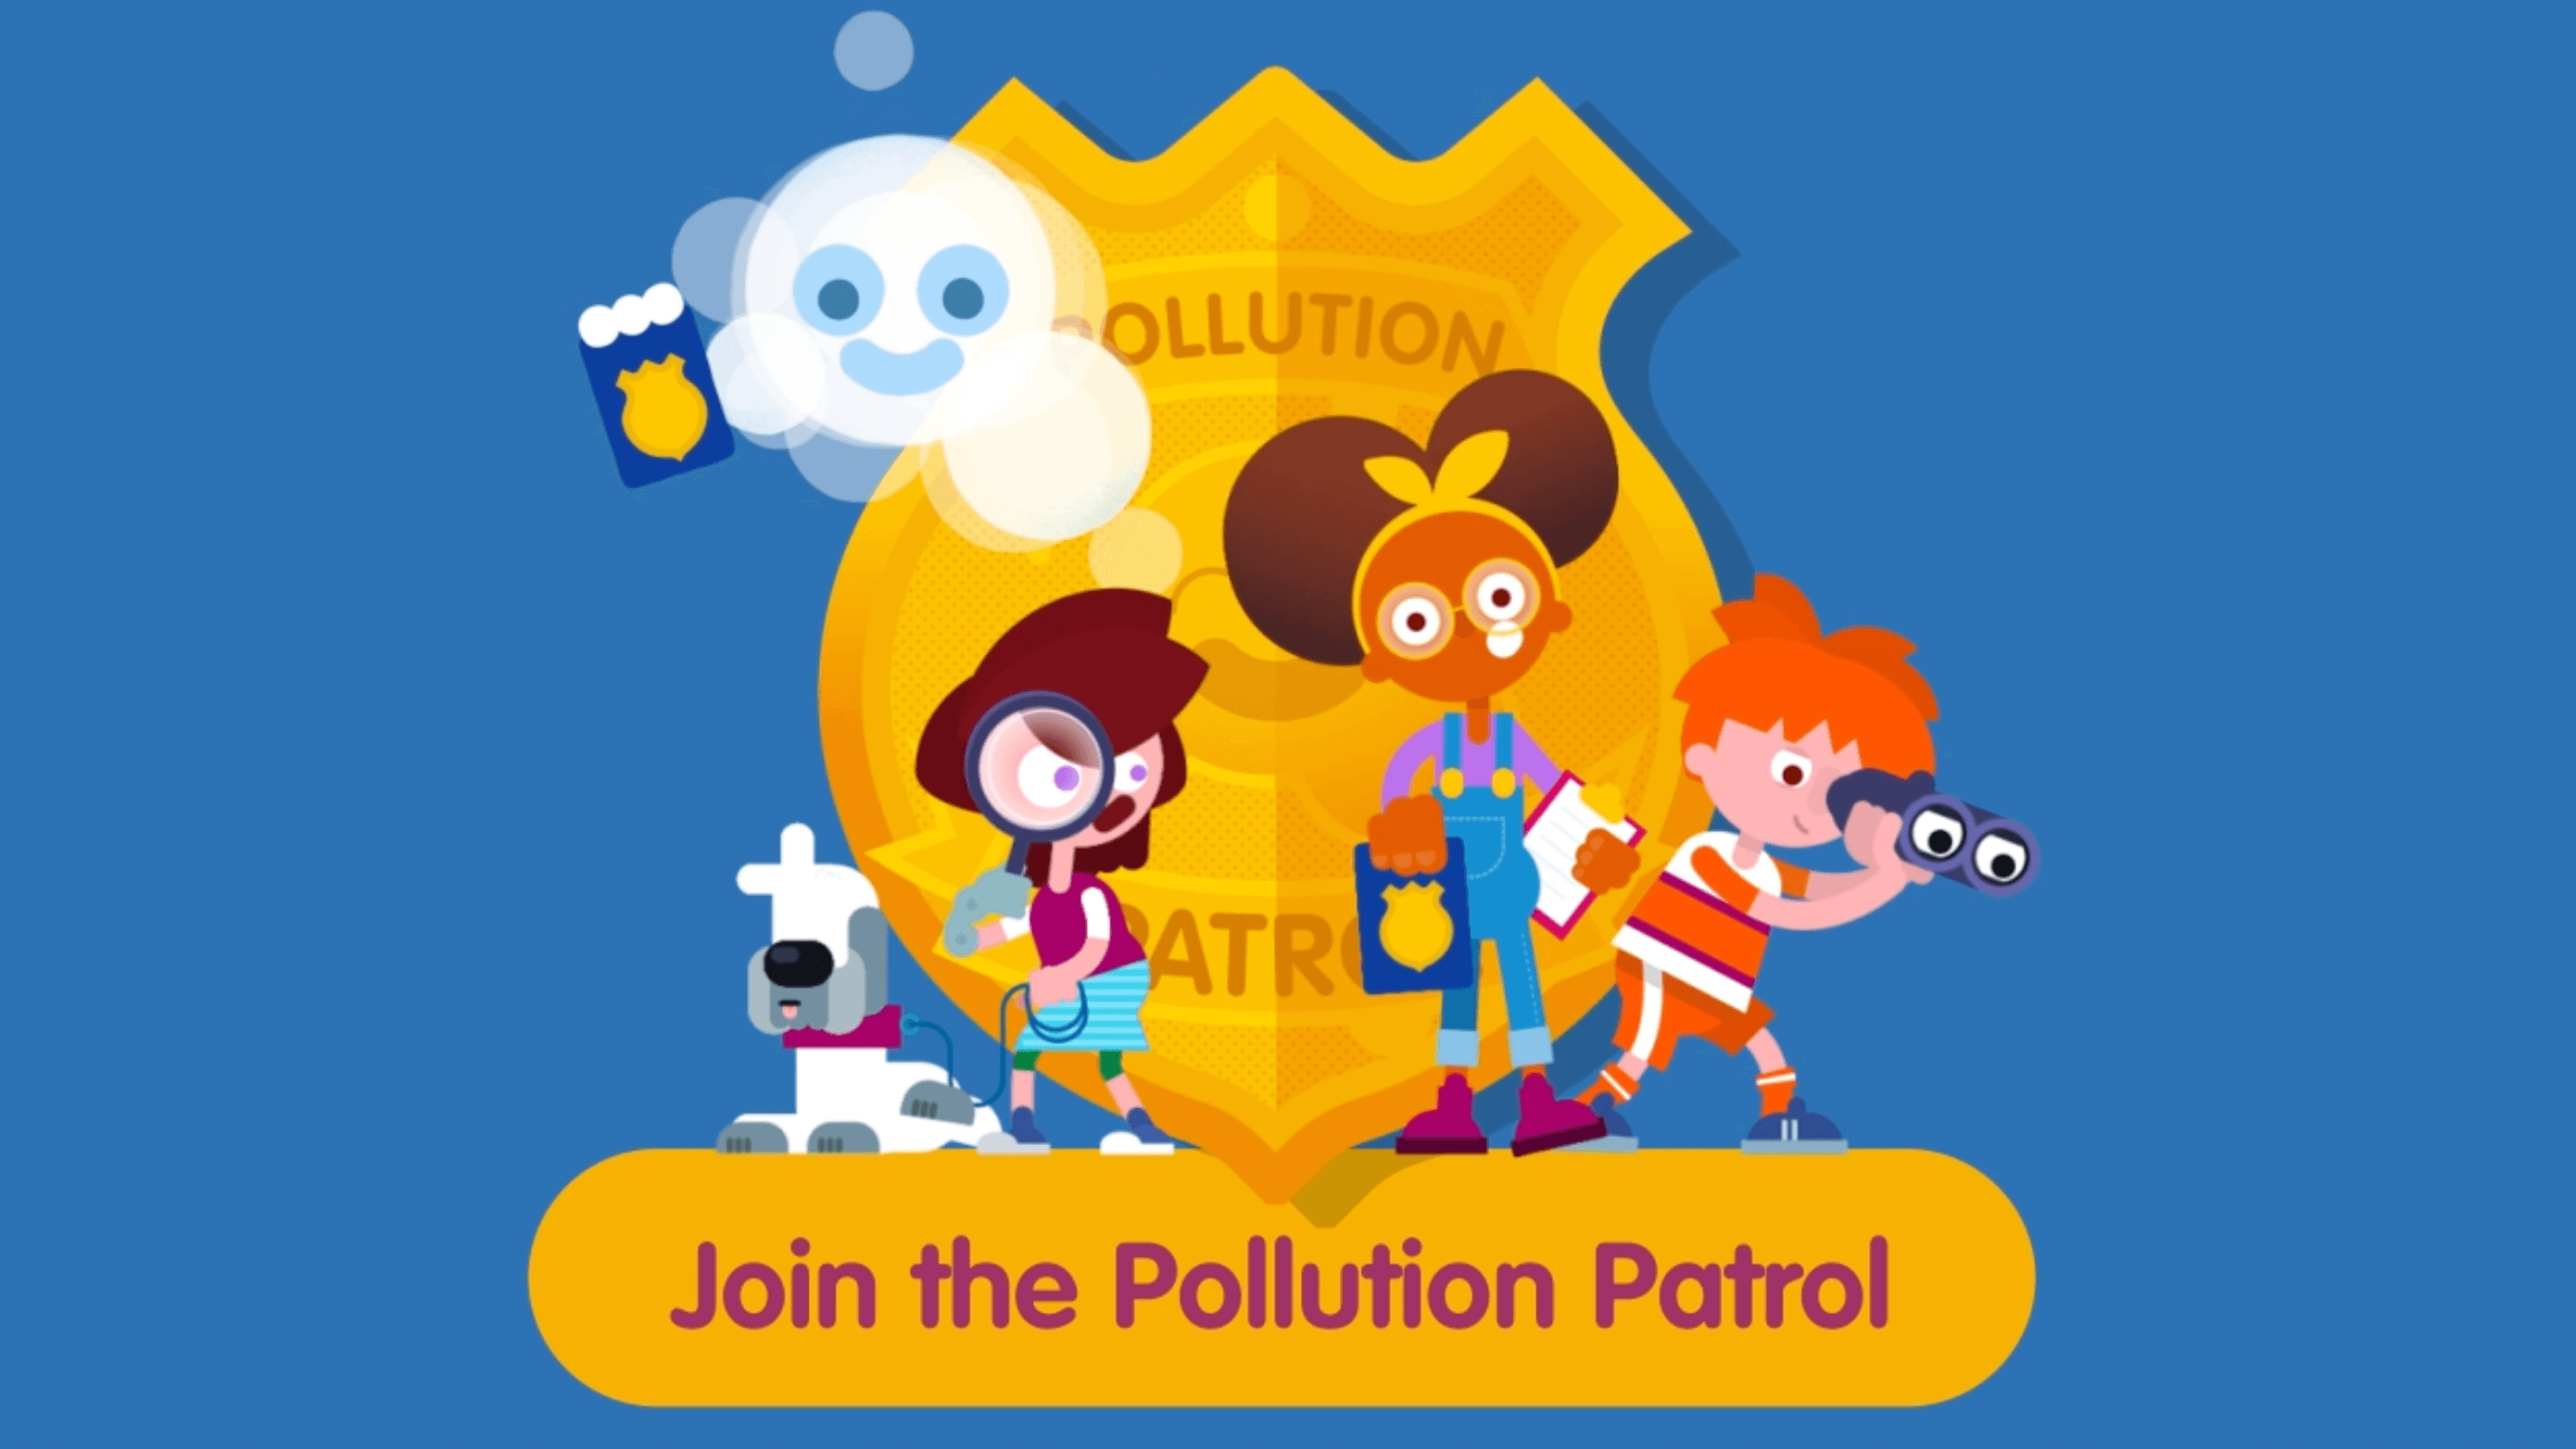 Pollution Patrol characters in front of a badge that encourages people to 